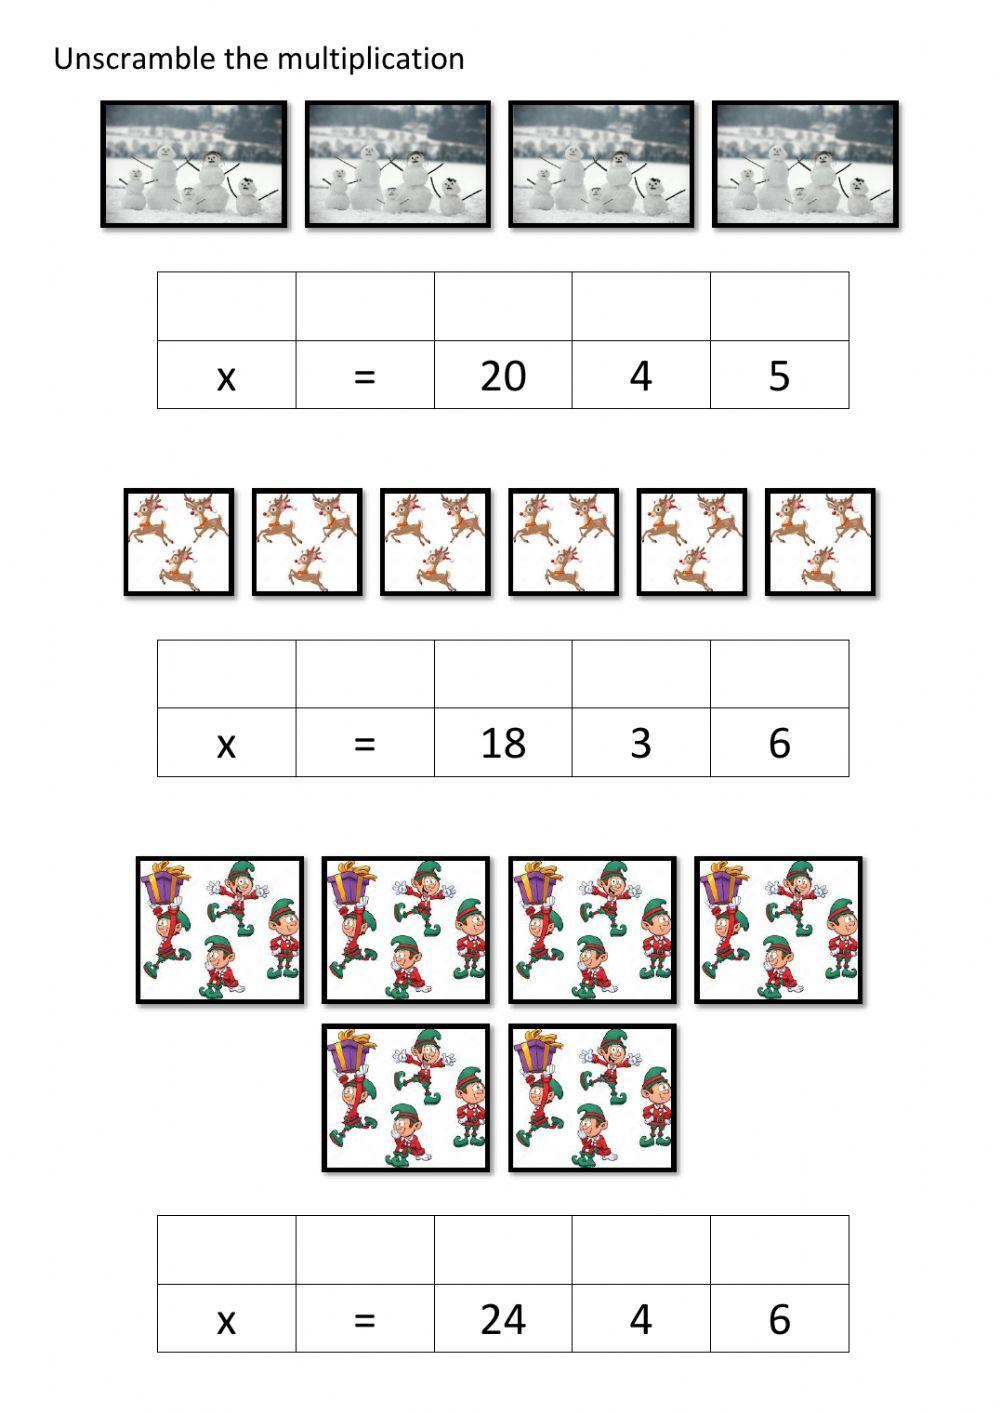 Unsclambing multiplications